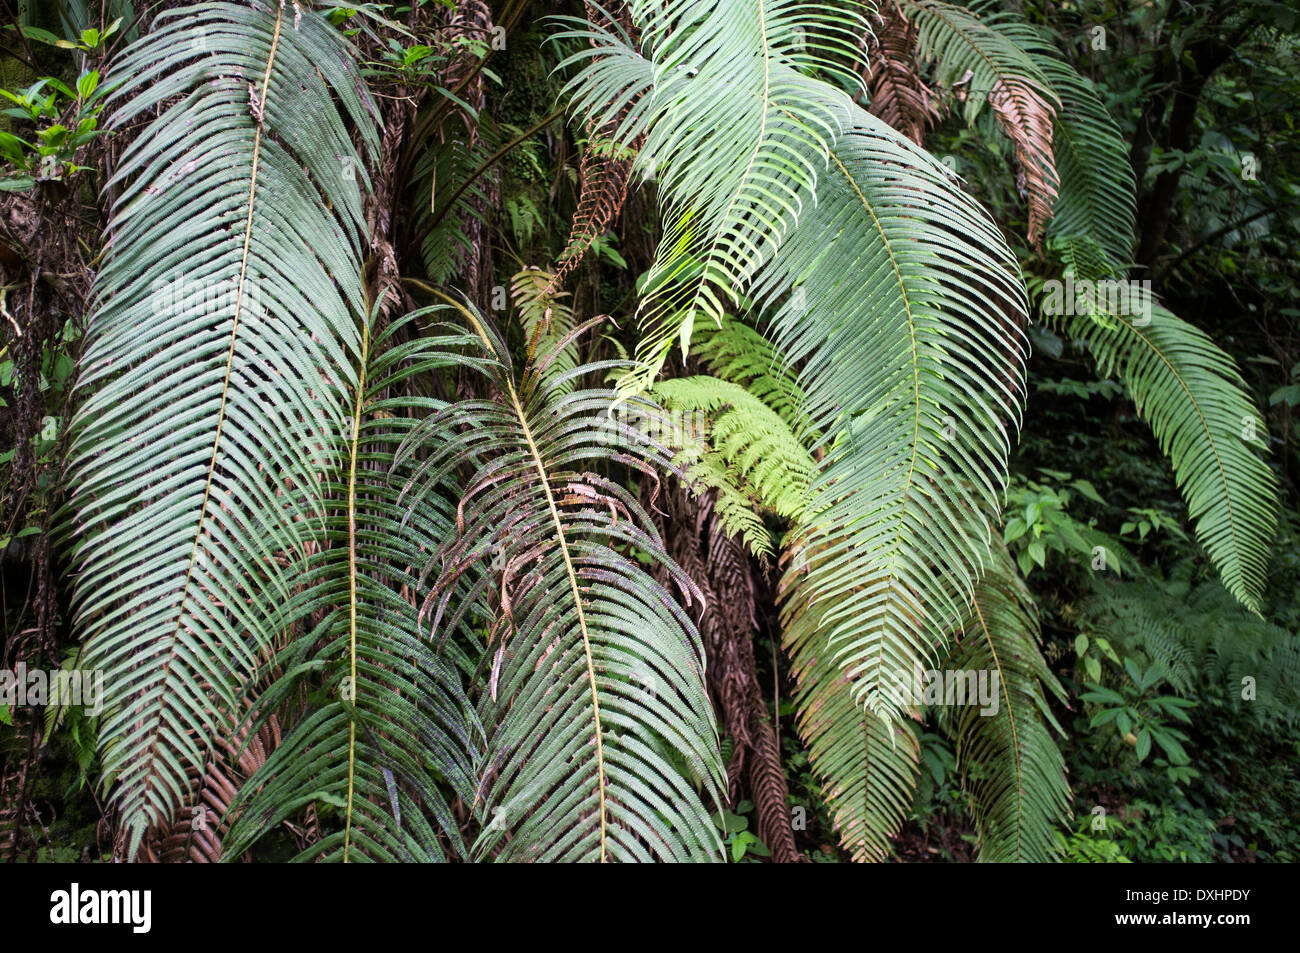 Tropical plant leaves, close-up, Indonesia, Asia, Stock Photo